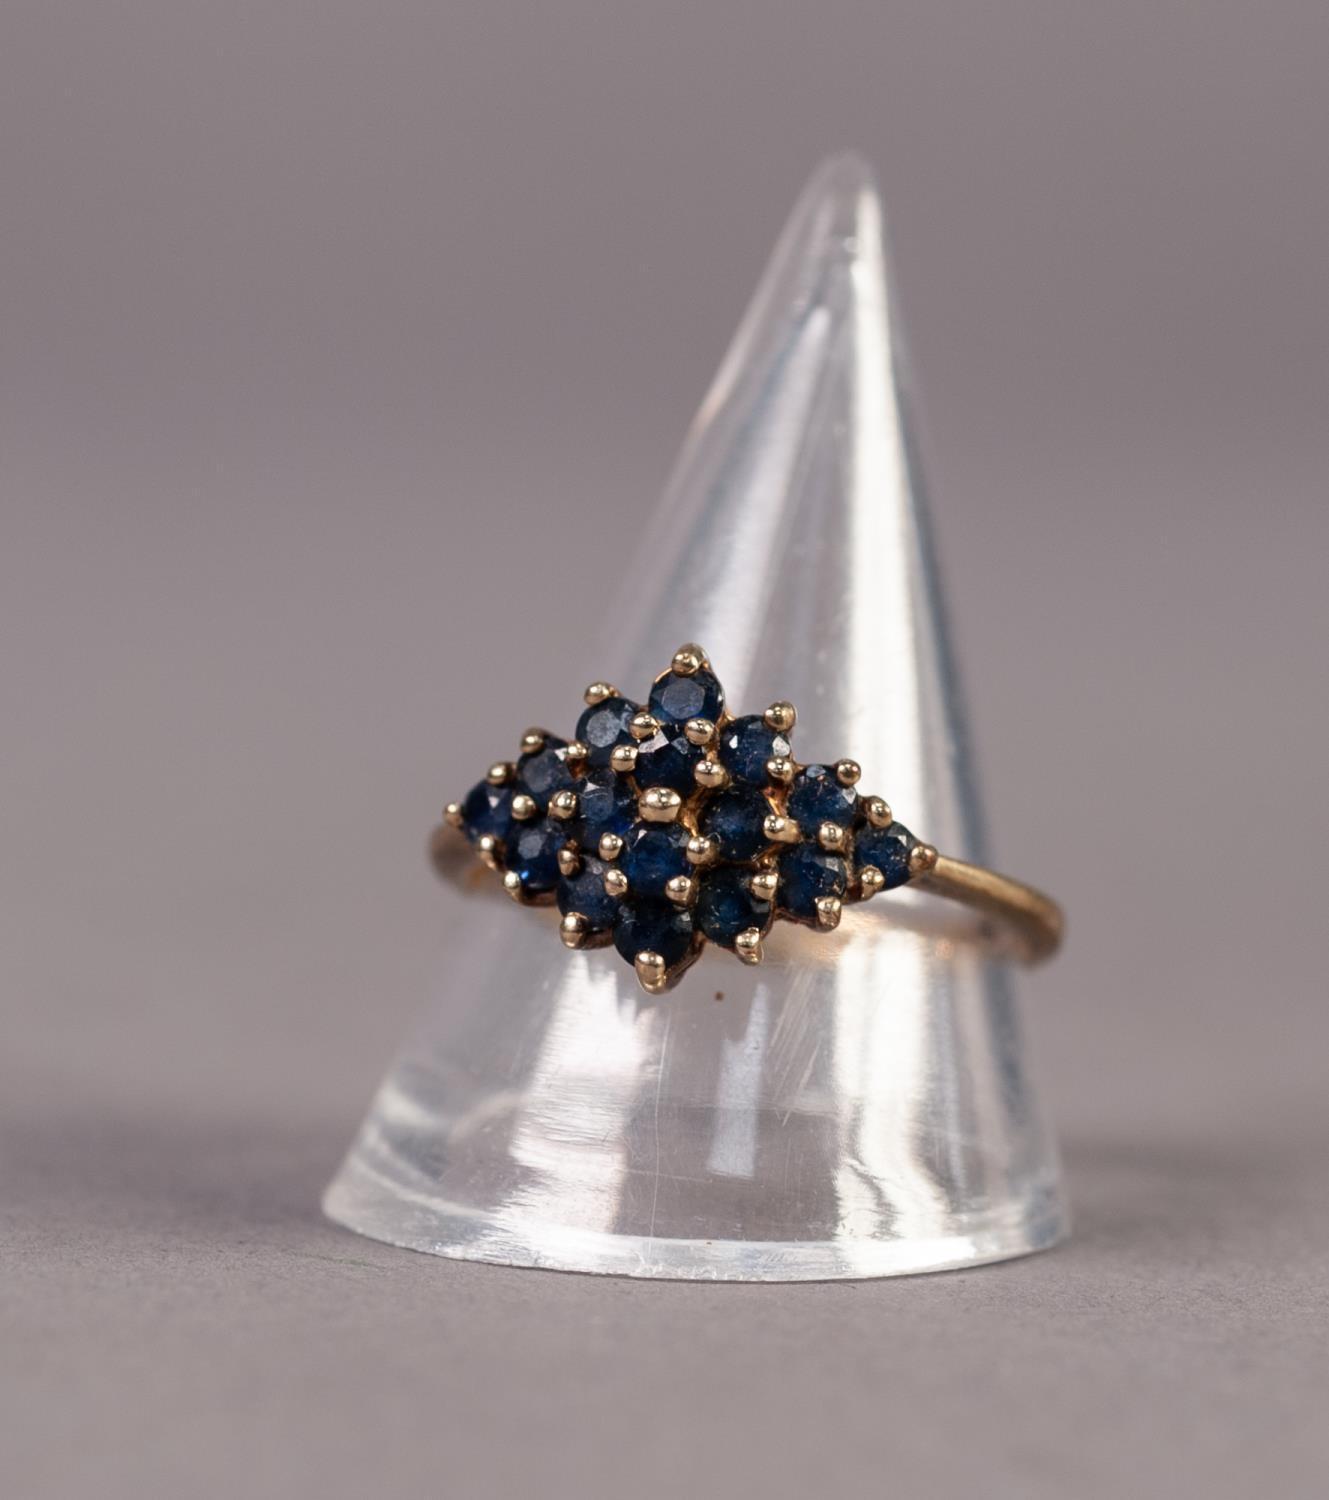 9ct GOLD AND SAPPHIRE RING, the diamond shaped top set with 16 small round sapphires, ring size R/S